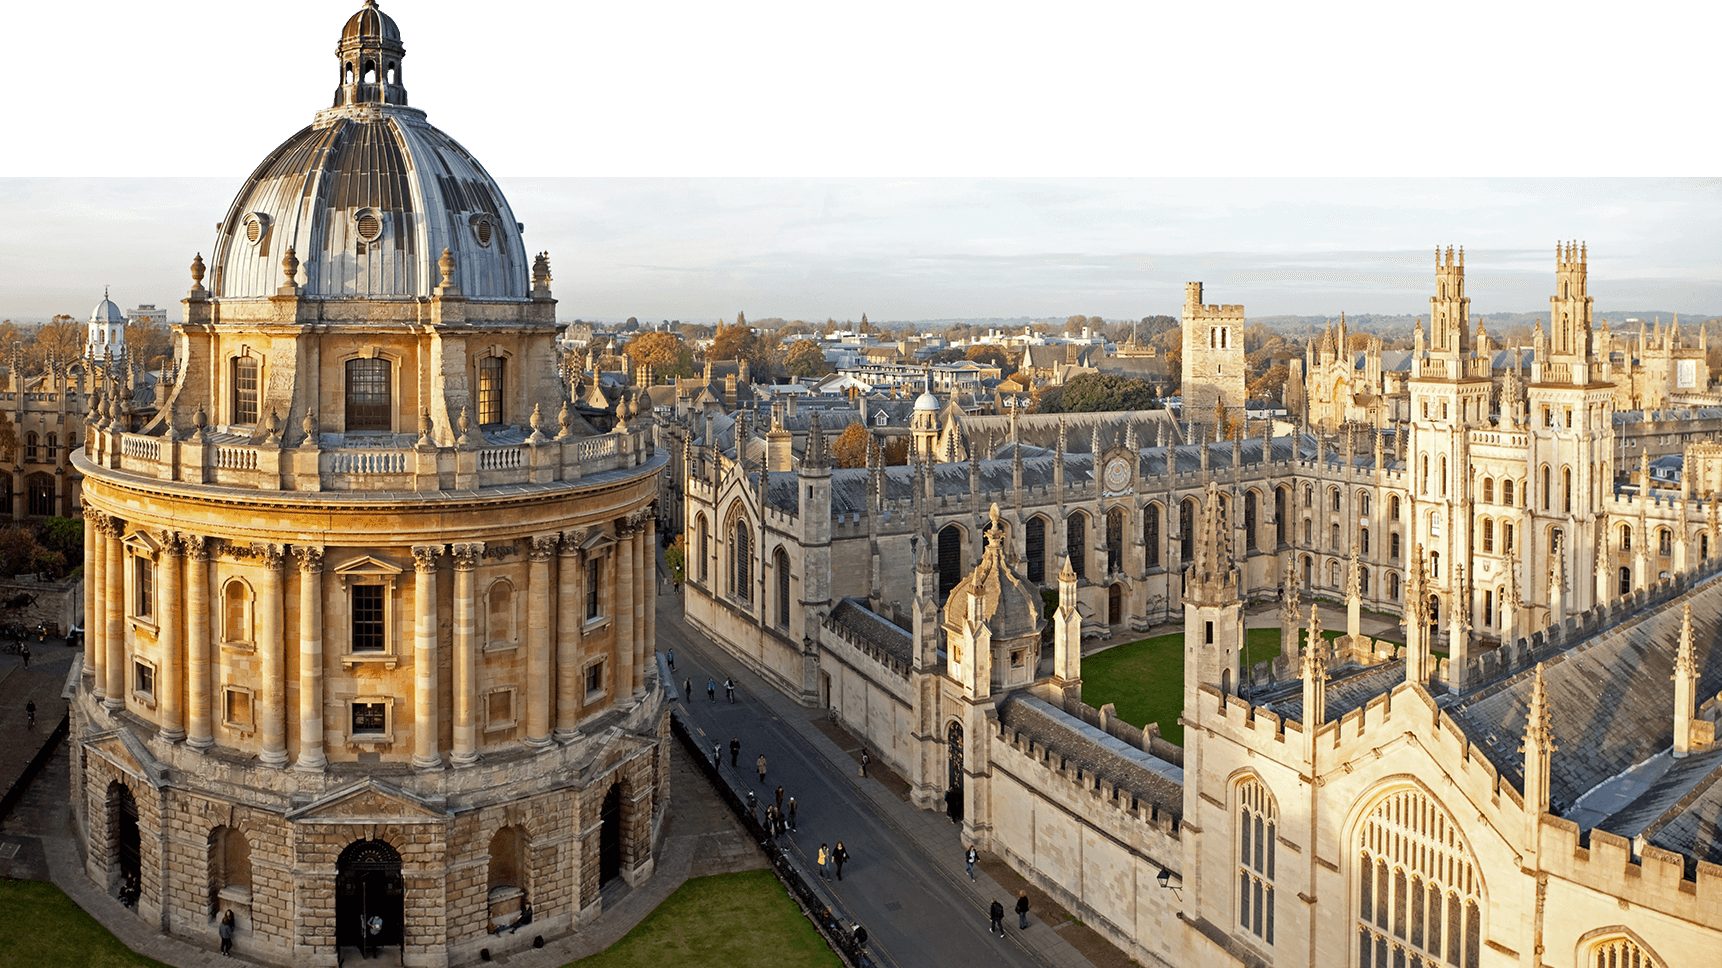 Radcliffe Camera and All Souls College, Oxford University